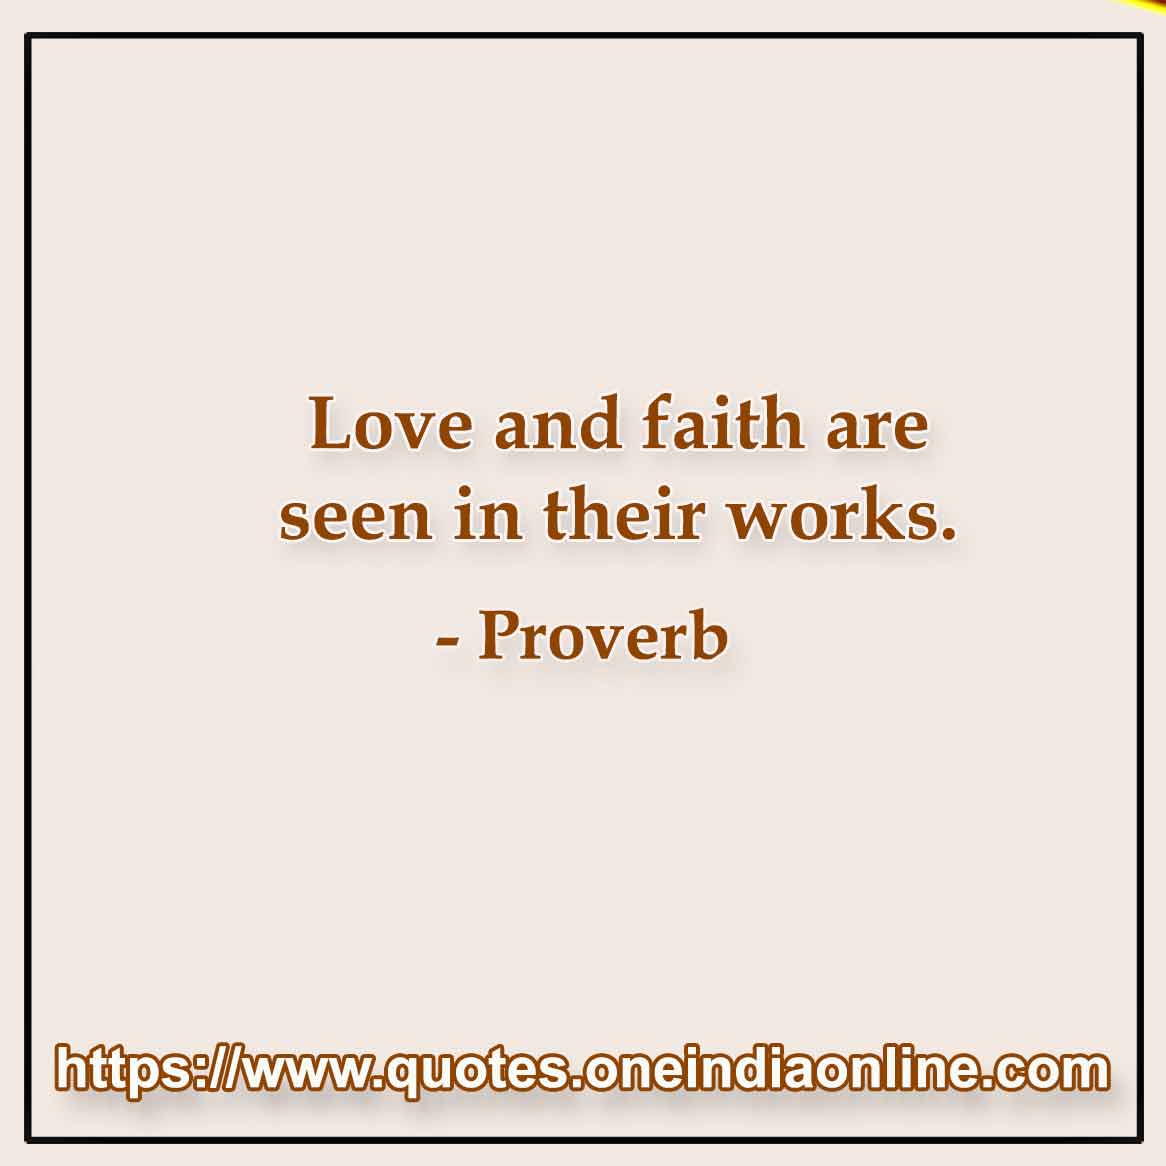 Love and faith are seen in their works.

 